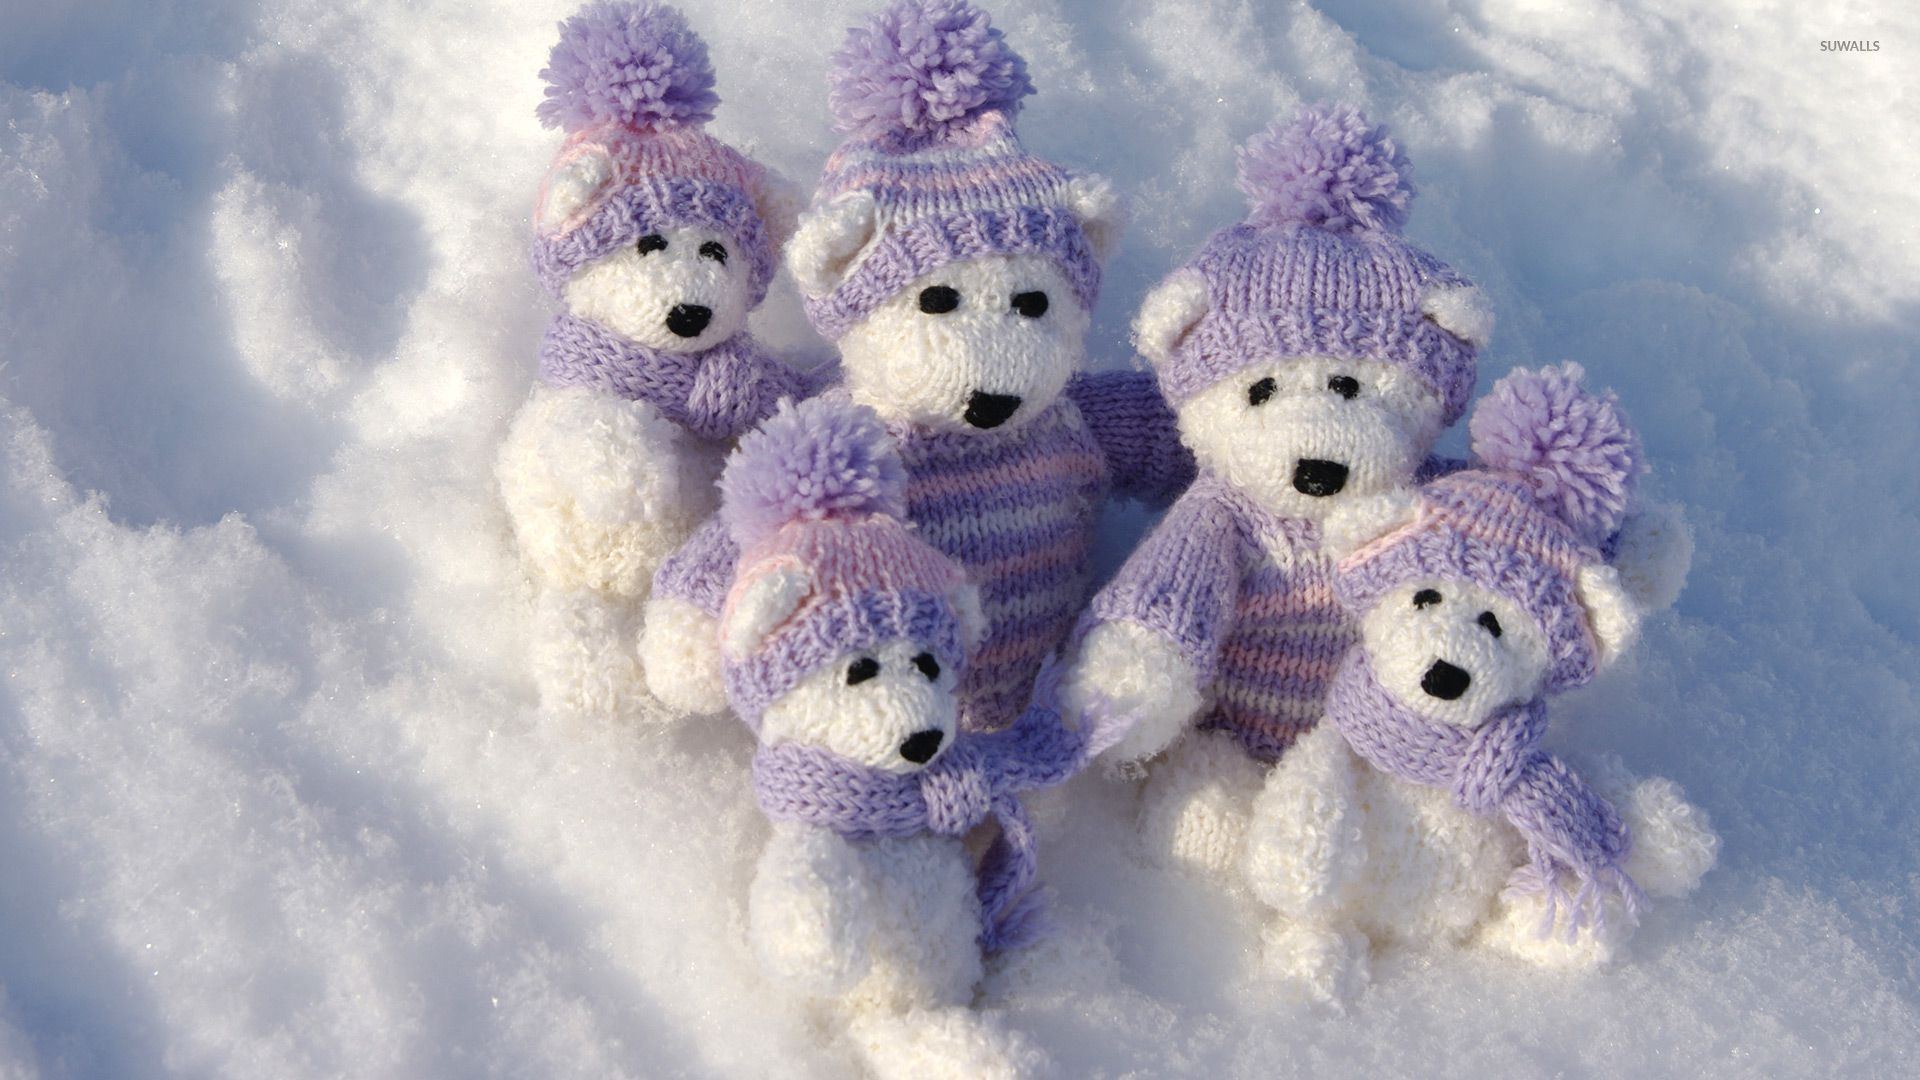 White teddy bears with purple clothes on the snow wallpaper wallpaper